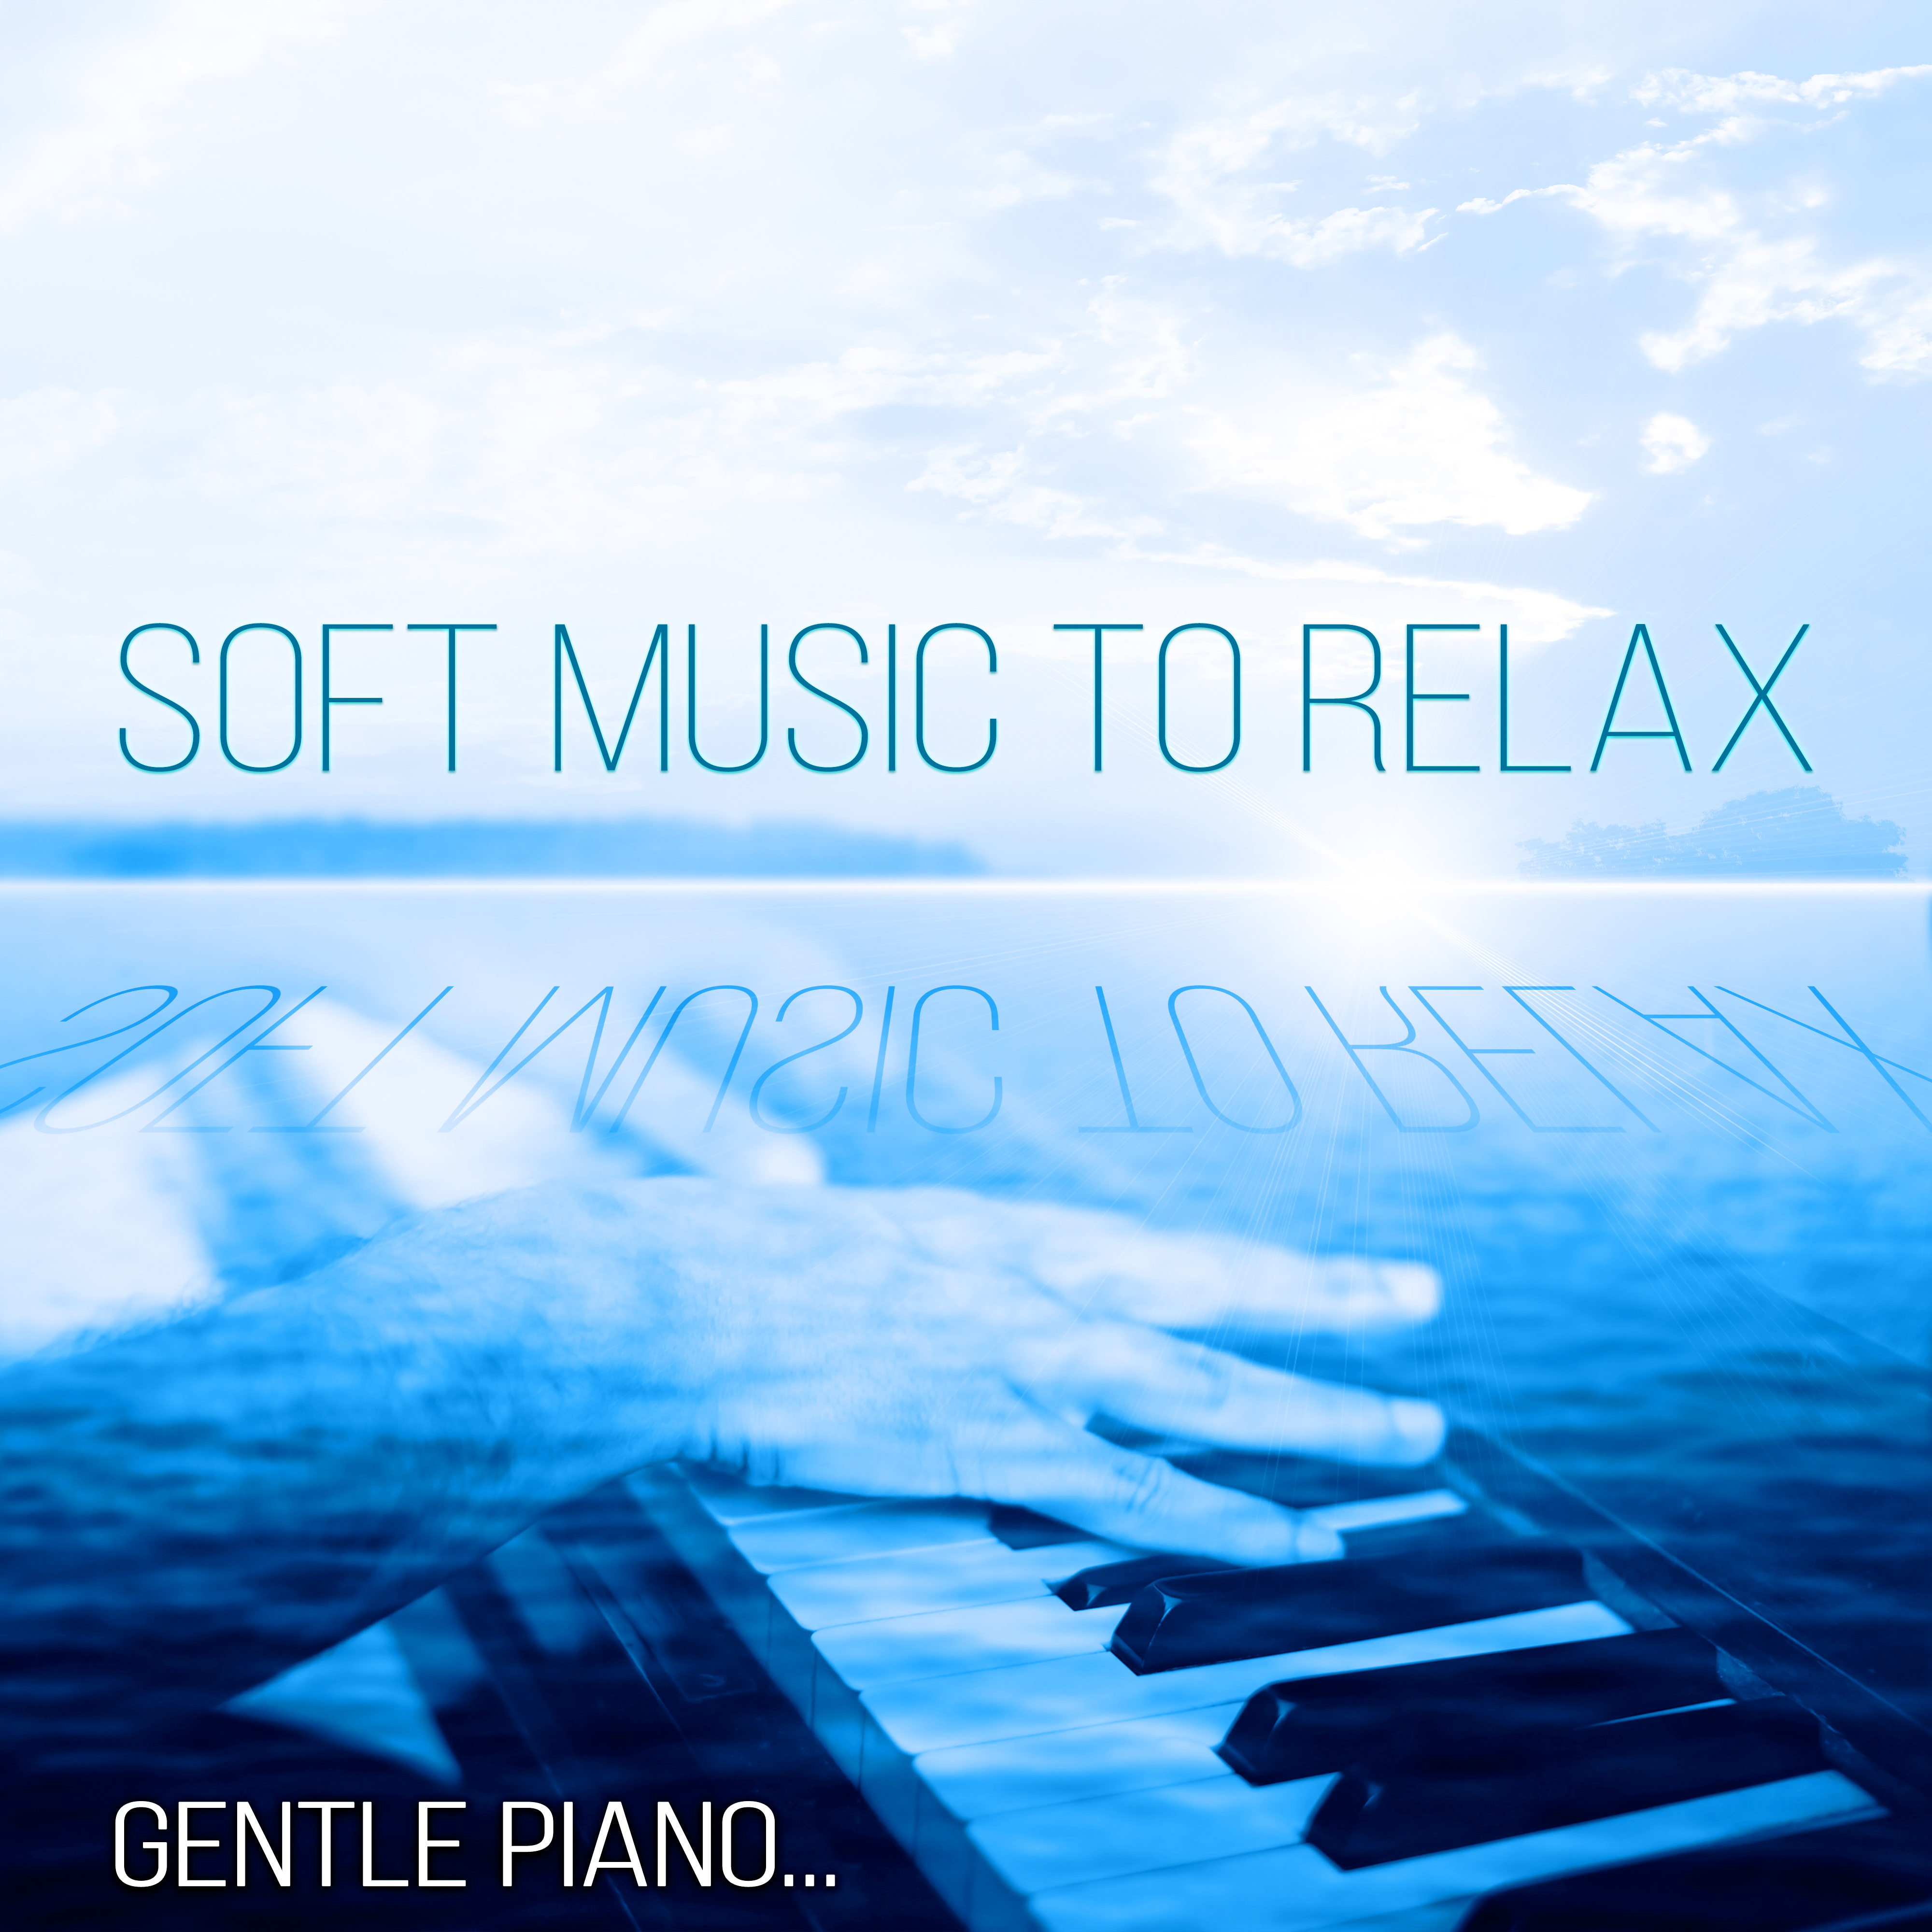 Soft Music to Relax - Gentle Piano Meditation, Lounge Music for Study, Spa, Massage, Soothing Sounds for Restful Sleep, Inner Peace